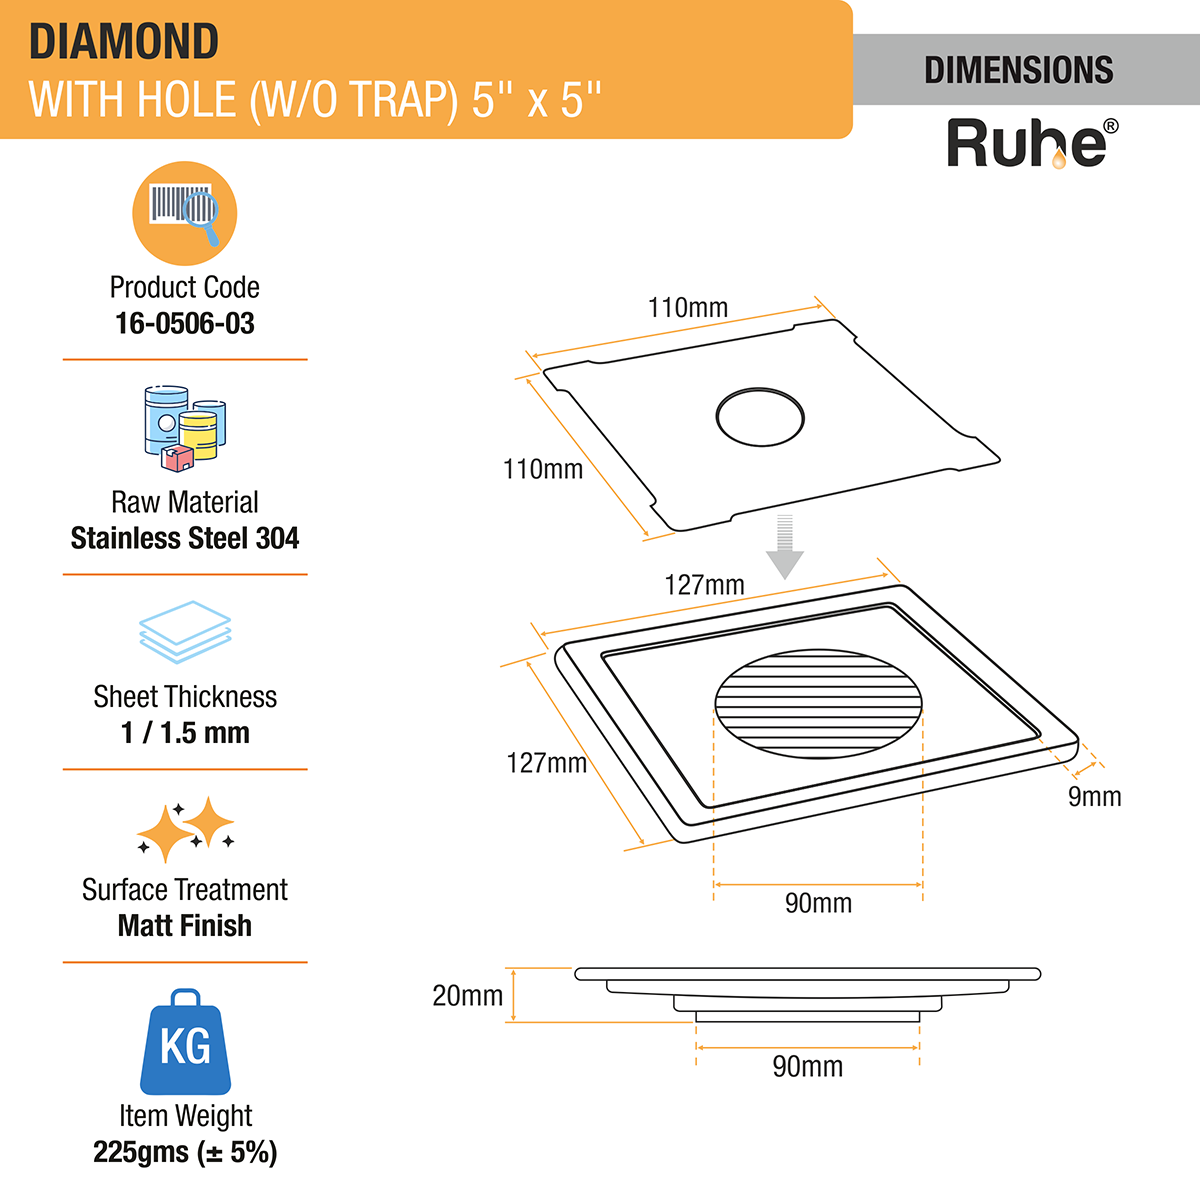 Diamond Square Floor Drain (5 x 5 Inches) with Hole (304 Grade) dimensions and size